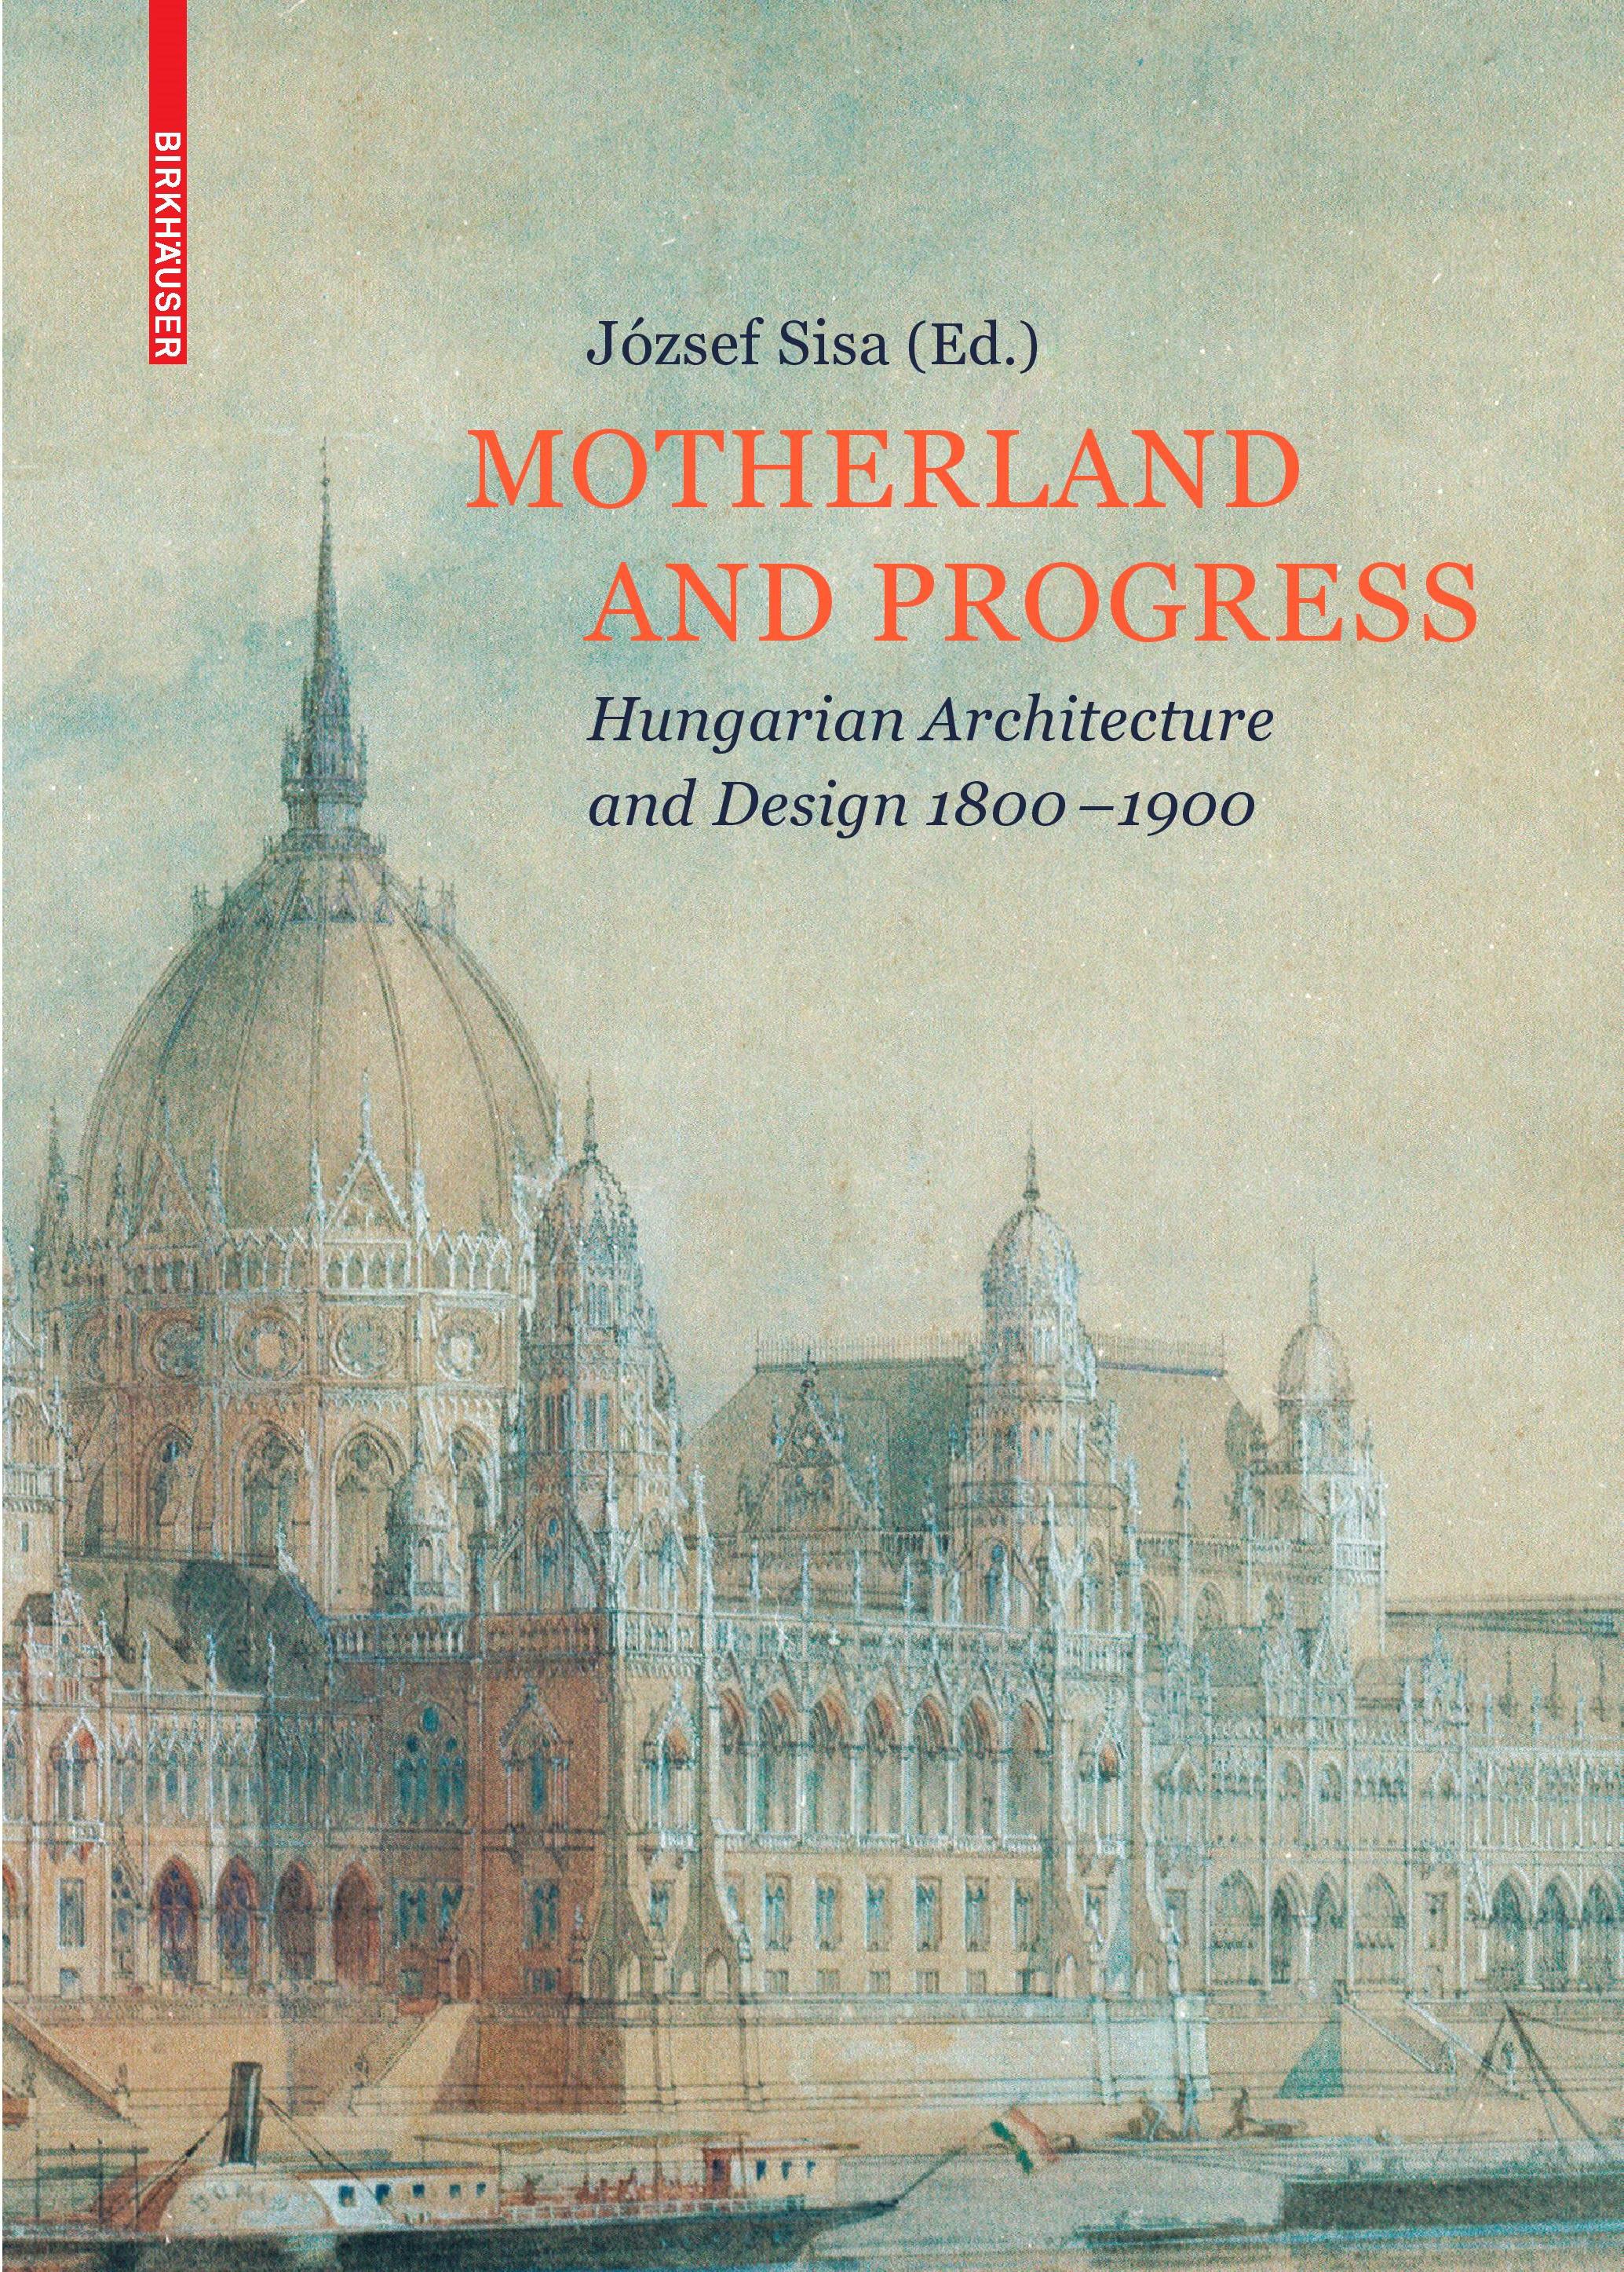 “Motherland and Progress” - A Concise History of Hungarian Architecture and Design 1800-1900